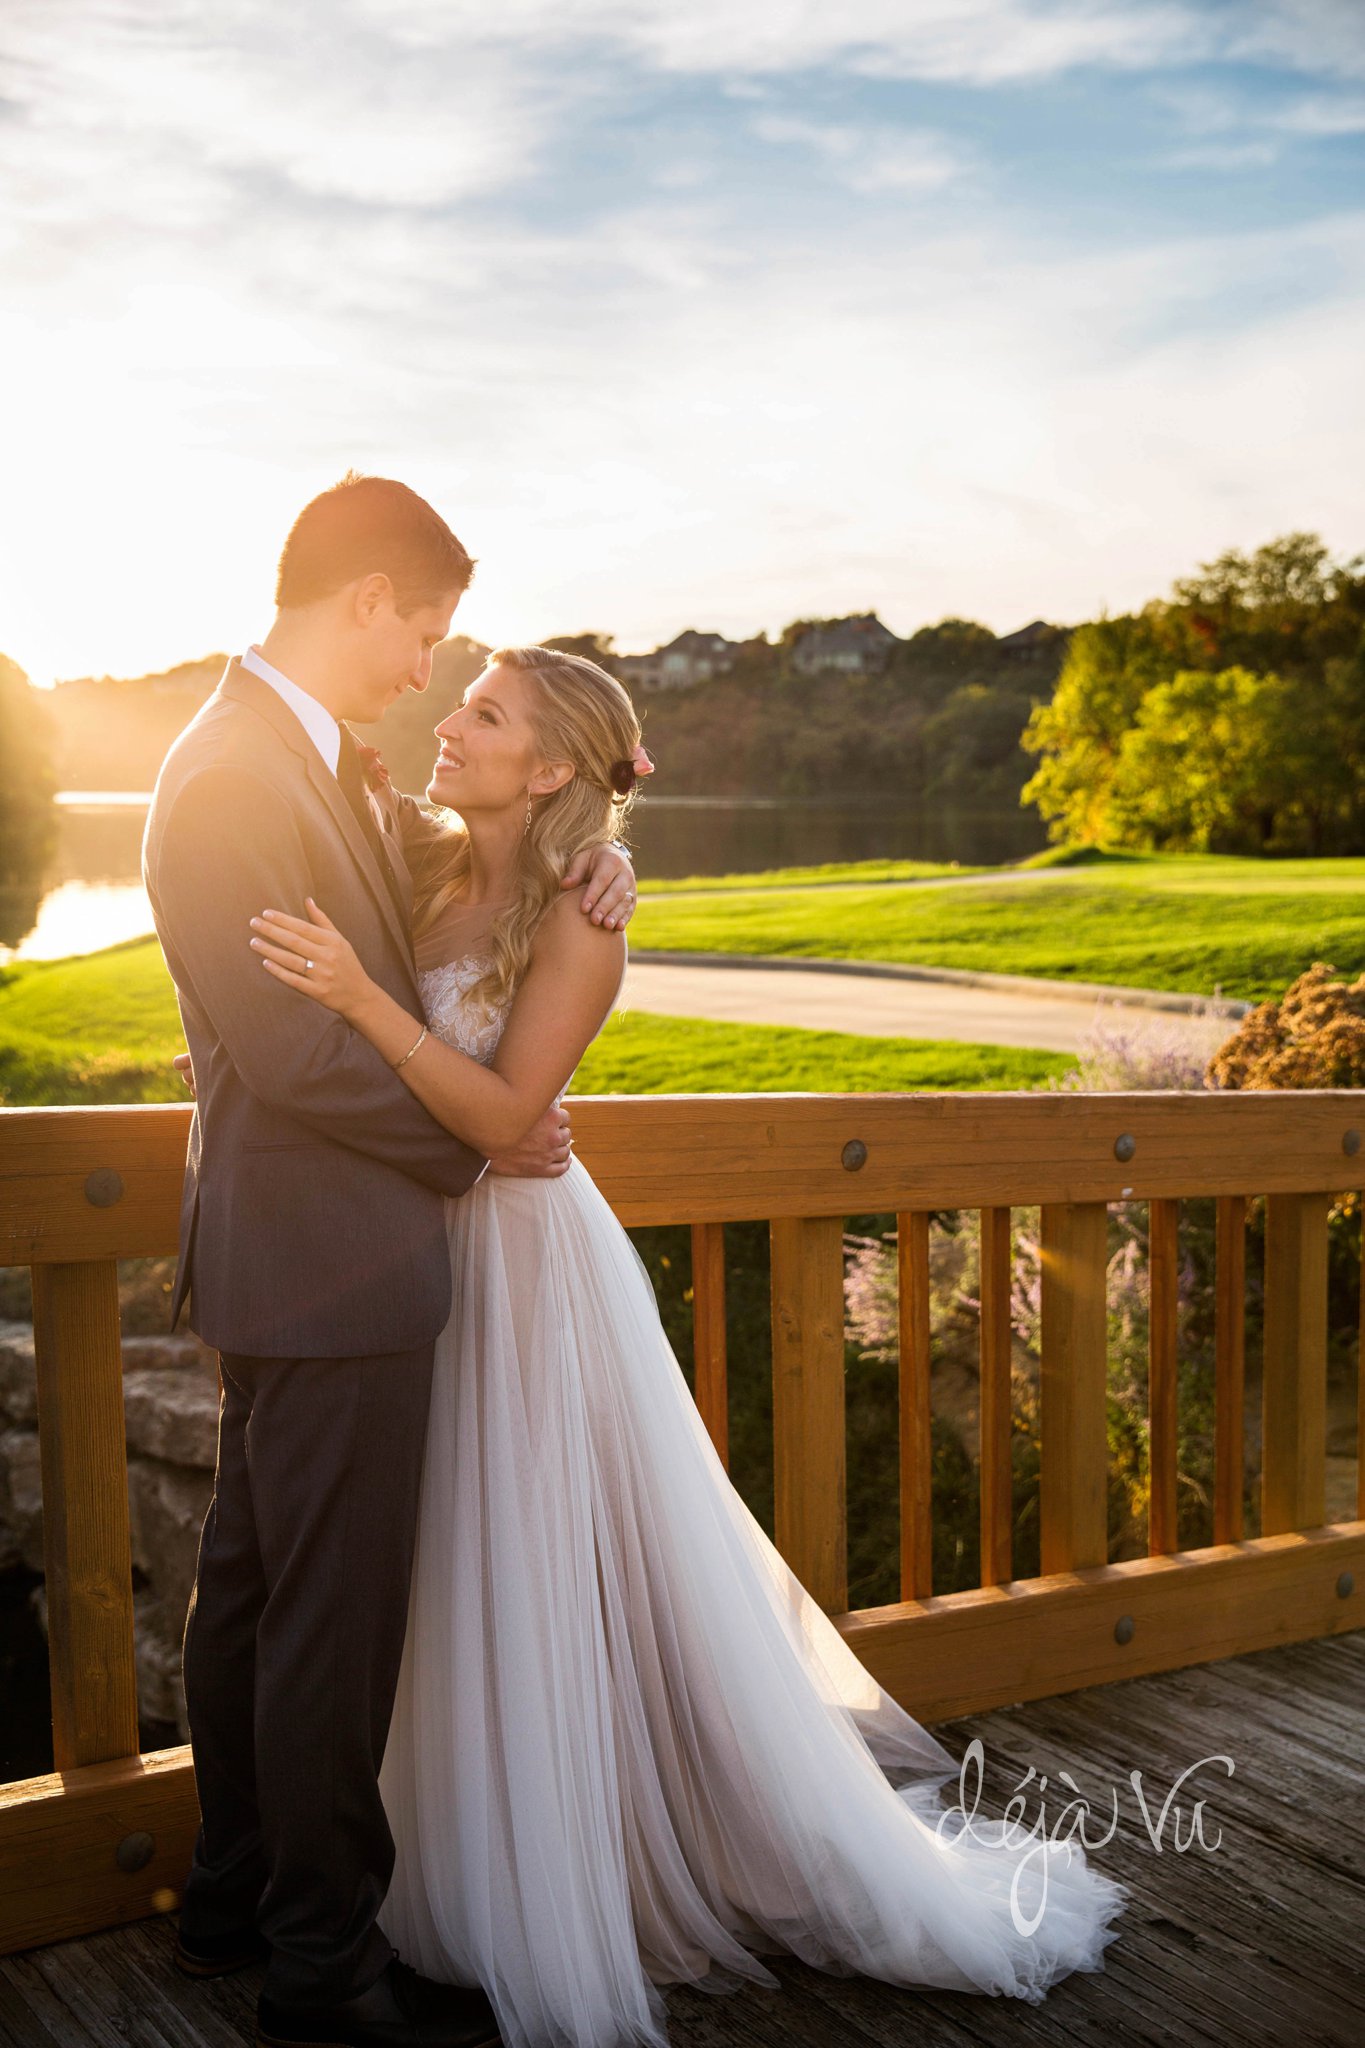 Shadow Glen Country Club Wedding | Bride and groom on bridge at sunset | Images by: www.feliciathephotographer.com